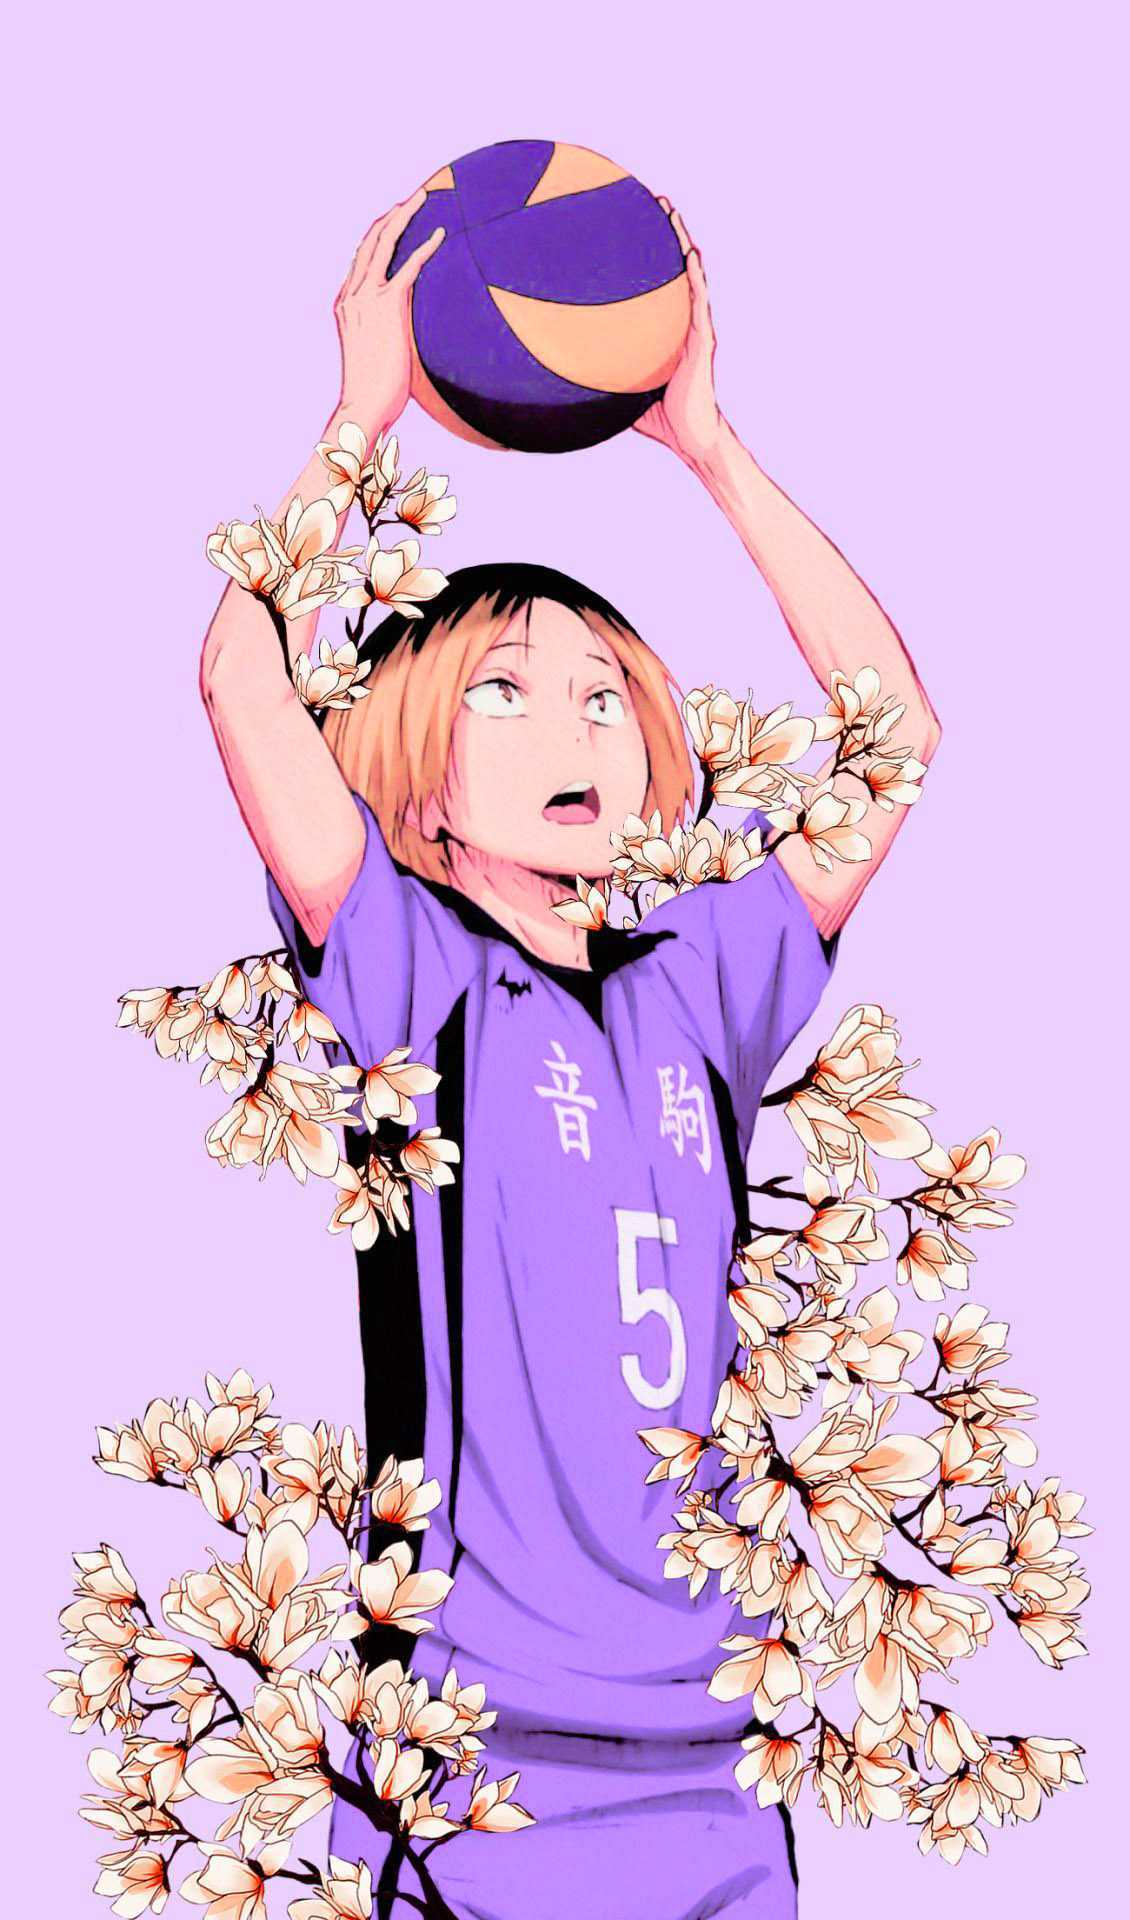 A girl in purple holding up an orange ball with flowers - Volleyball